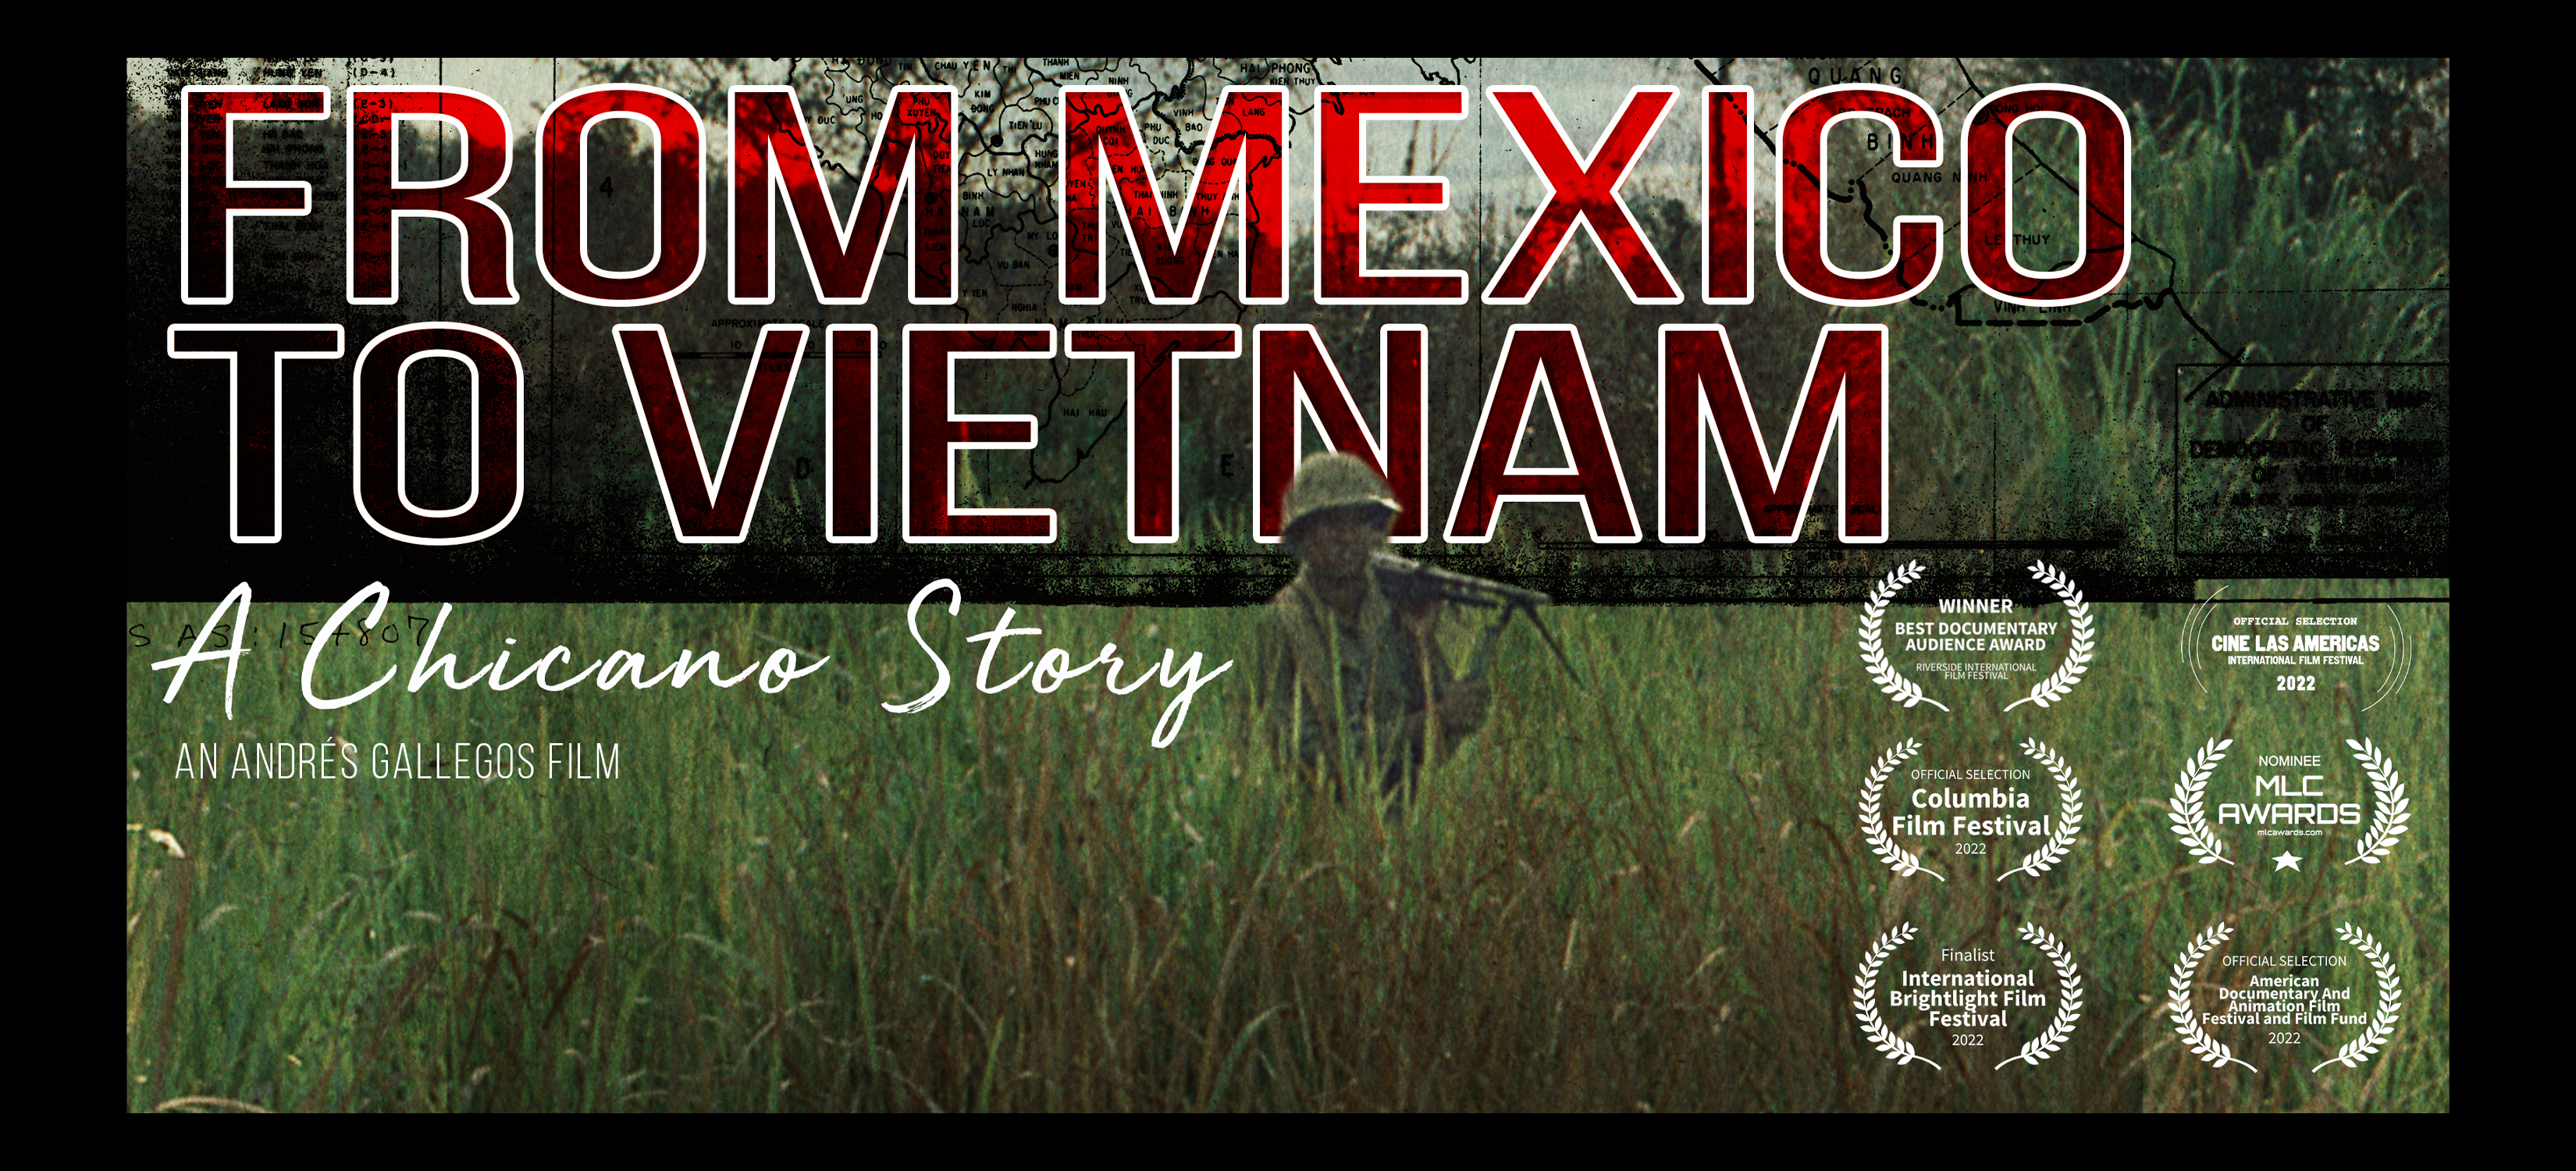 From Mexico to Vietnam